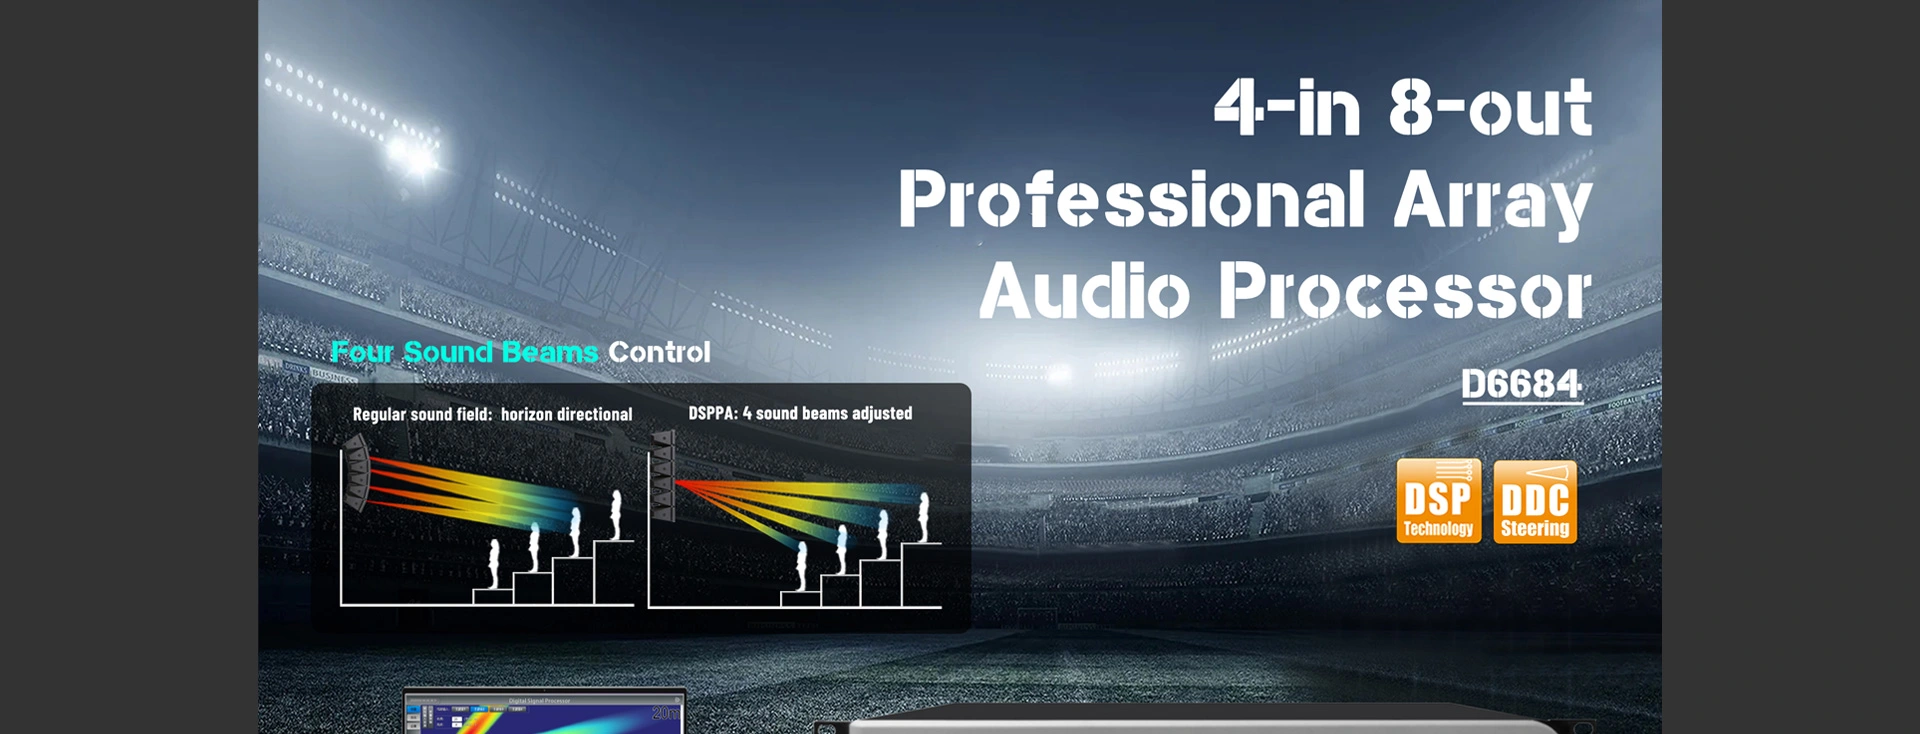 Processore Audio professionale Array 4-in 8-out